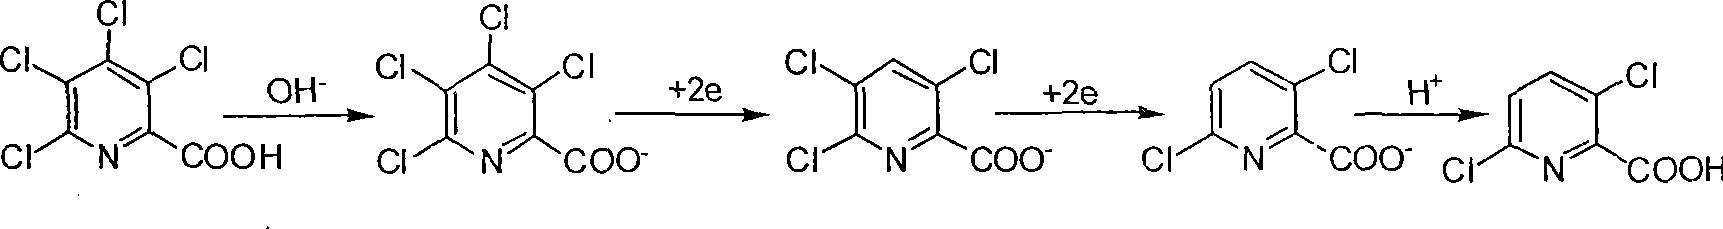 Electrolytic synthesis method for 3,6-dichloropicolinic acid